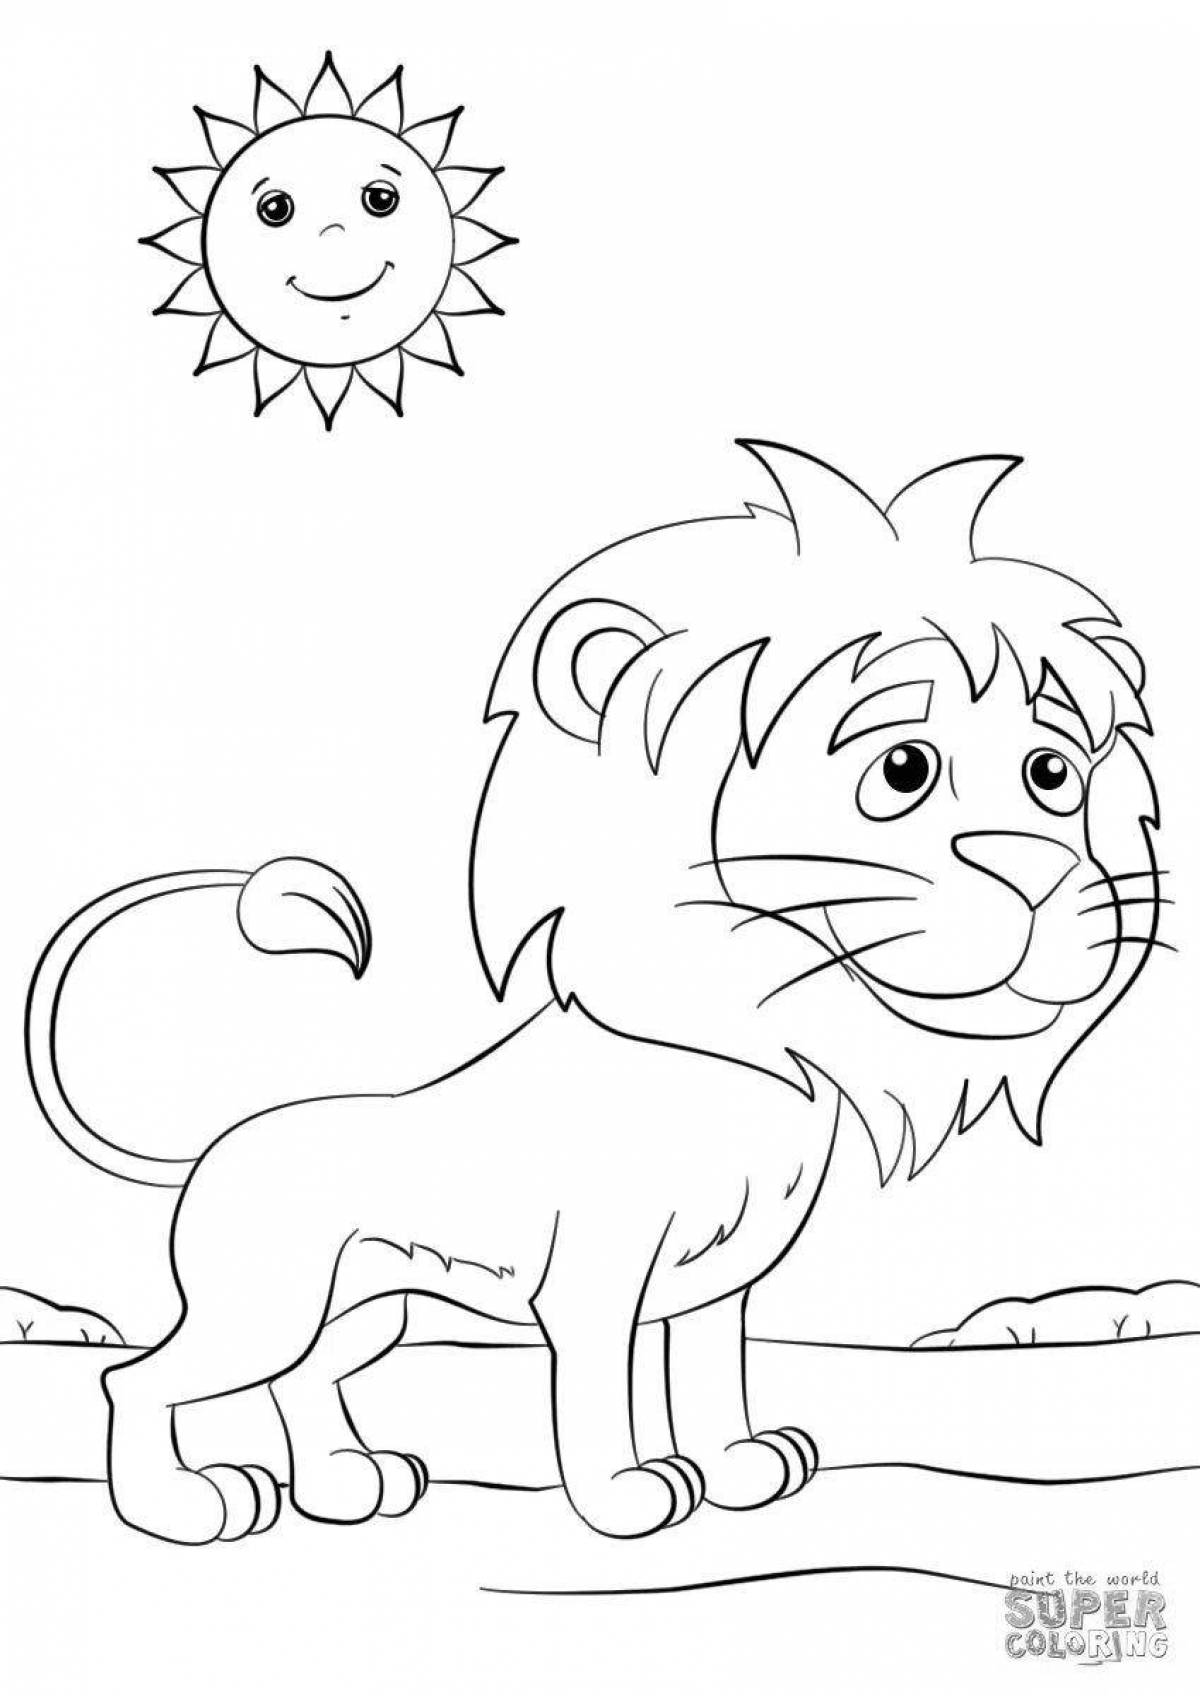 Impressive lion coloring book for 6-7 year olds